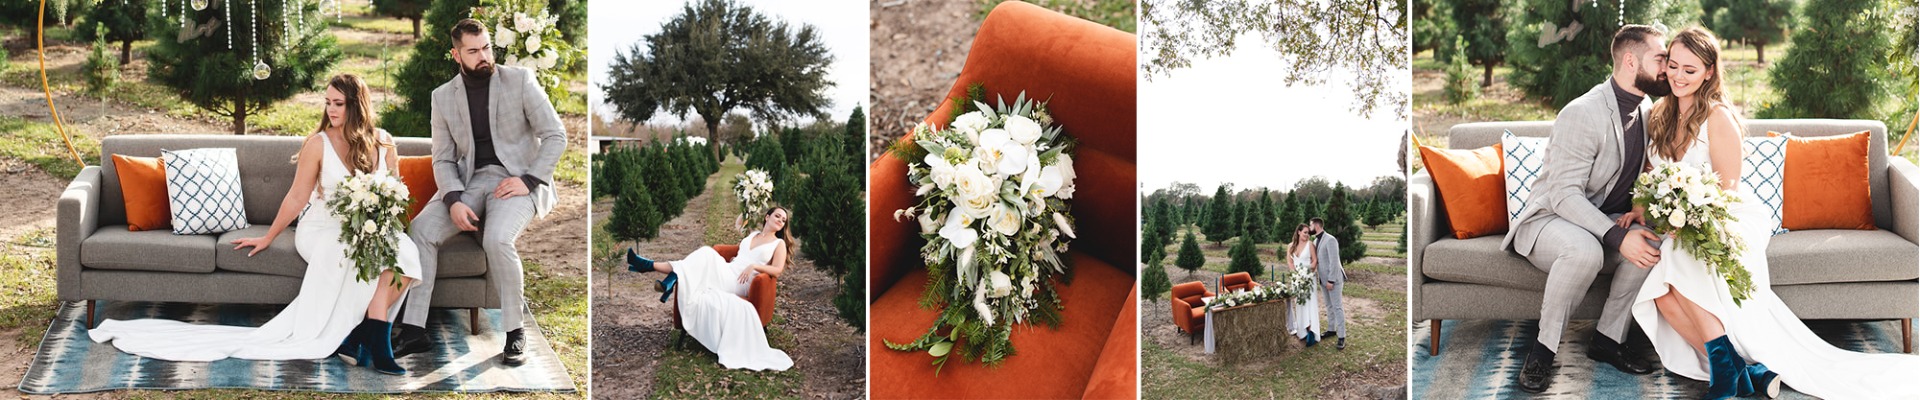 wedding photoshoot with gray and orange furniture outdoors